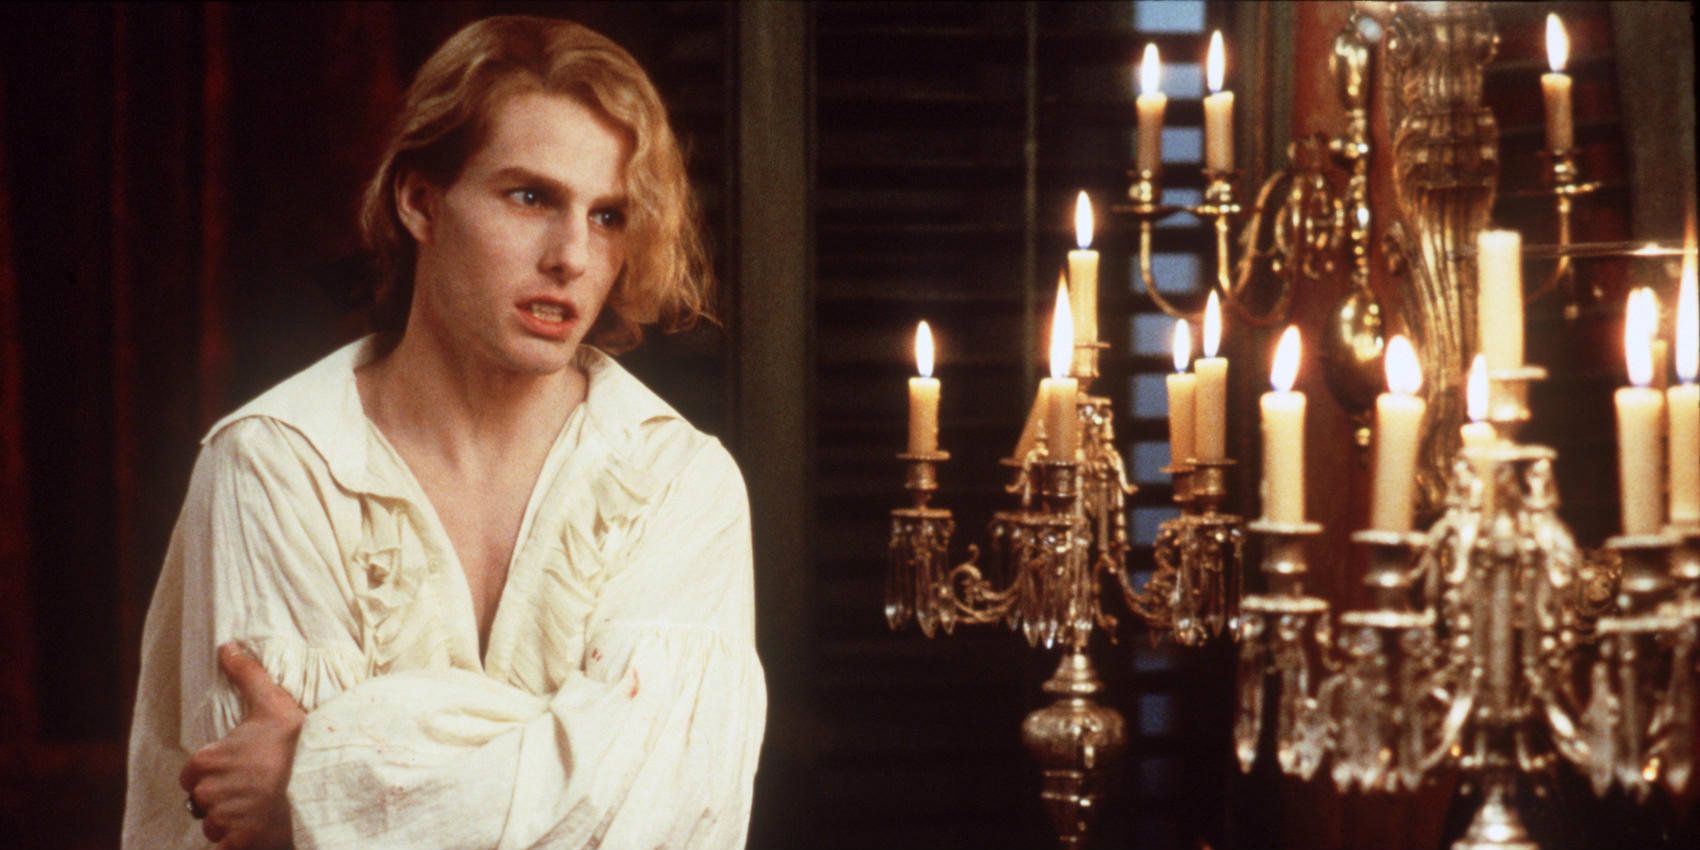 Lestat (Tom Cruise) grasping his arm next to a chandelier with lit candles in Interview with the Vampire